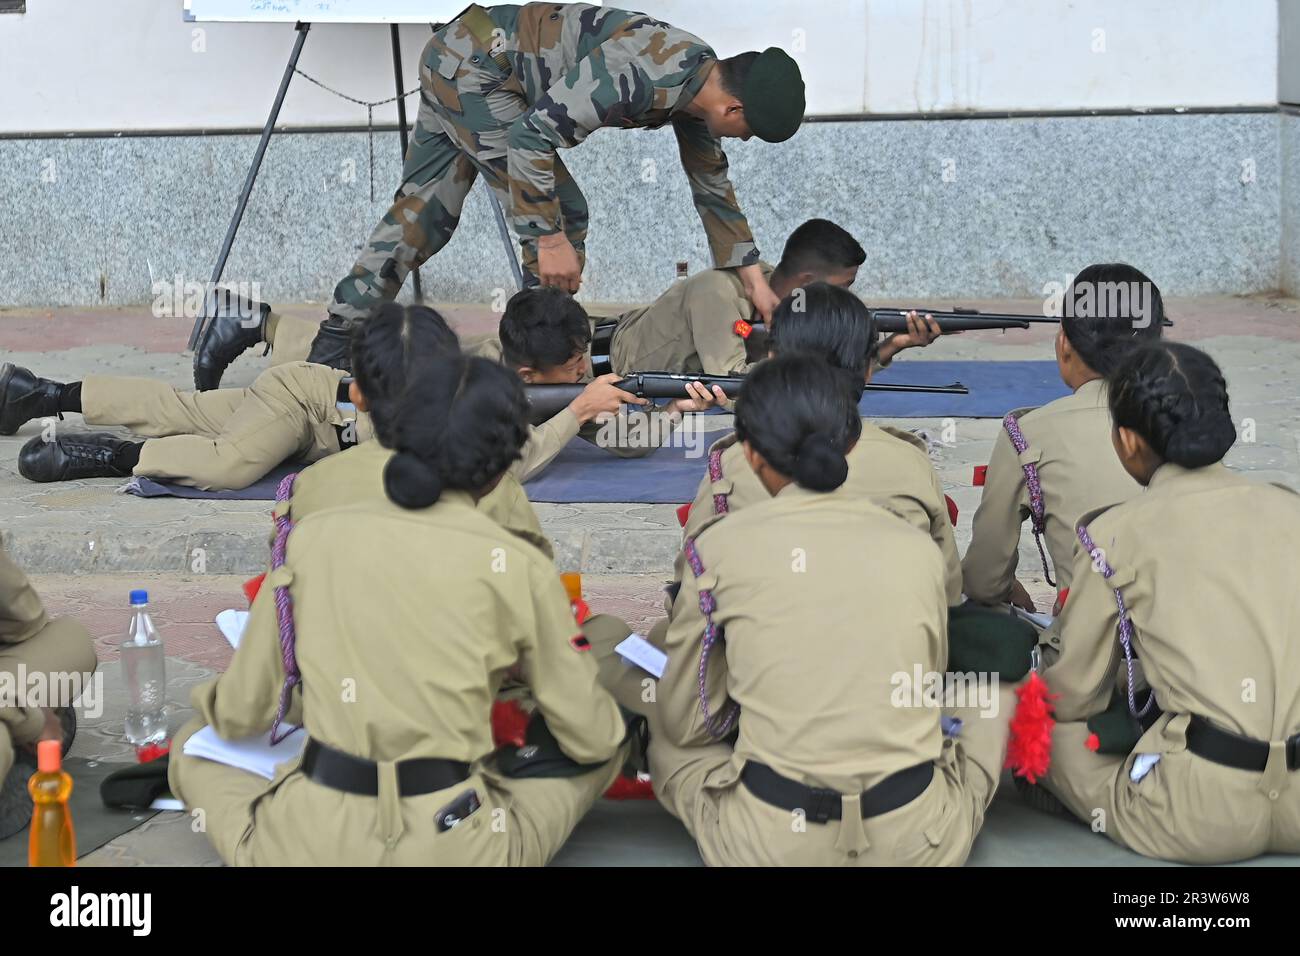 NCC cadets perform at a parade during the combined annual training camp in Netaji Subhash Regional Coaching Centre at Agartala. India. Stock Photo